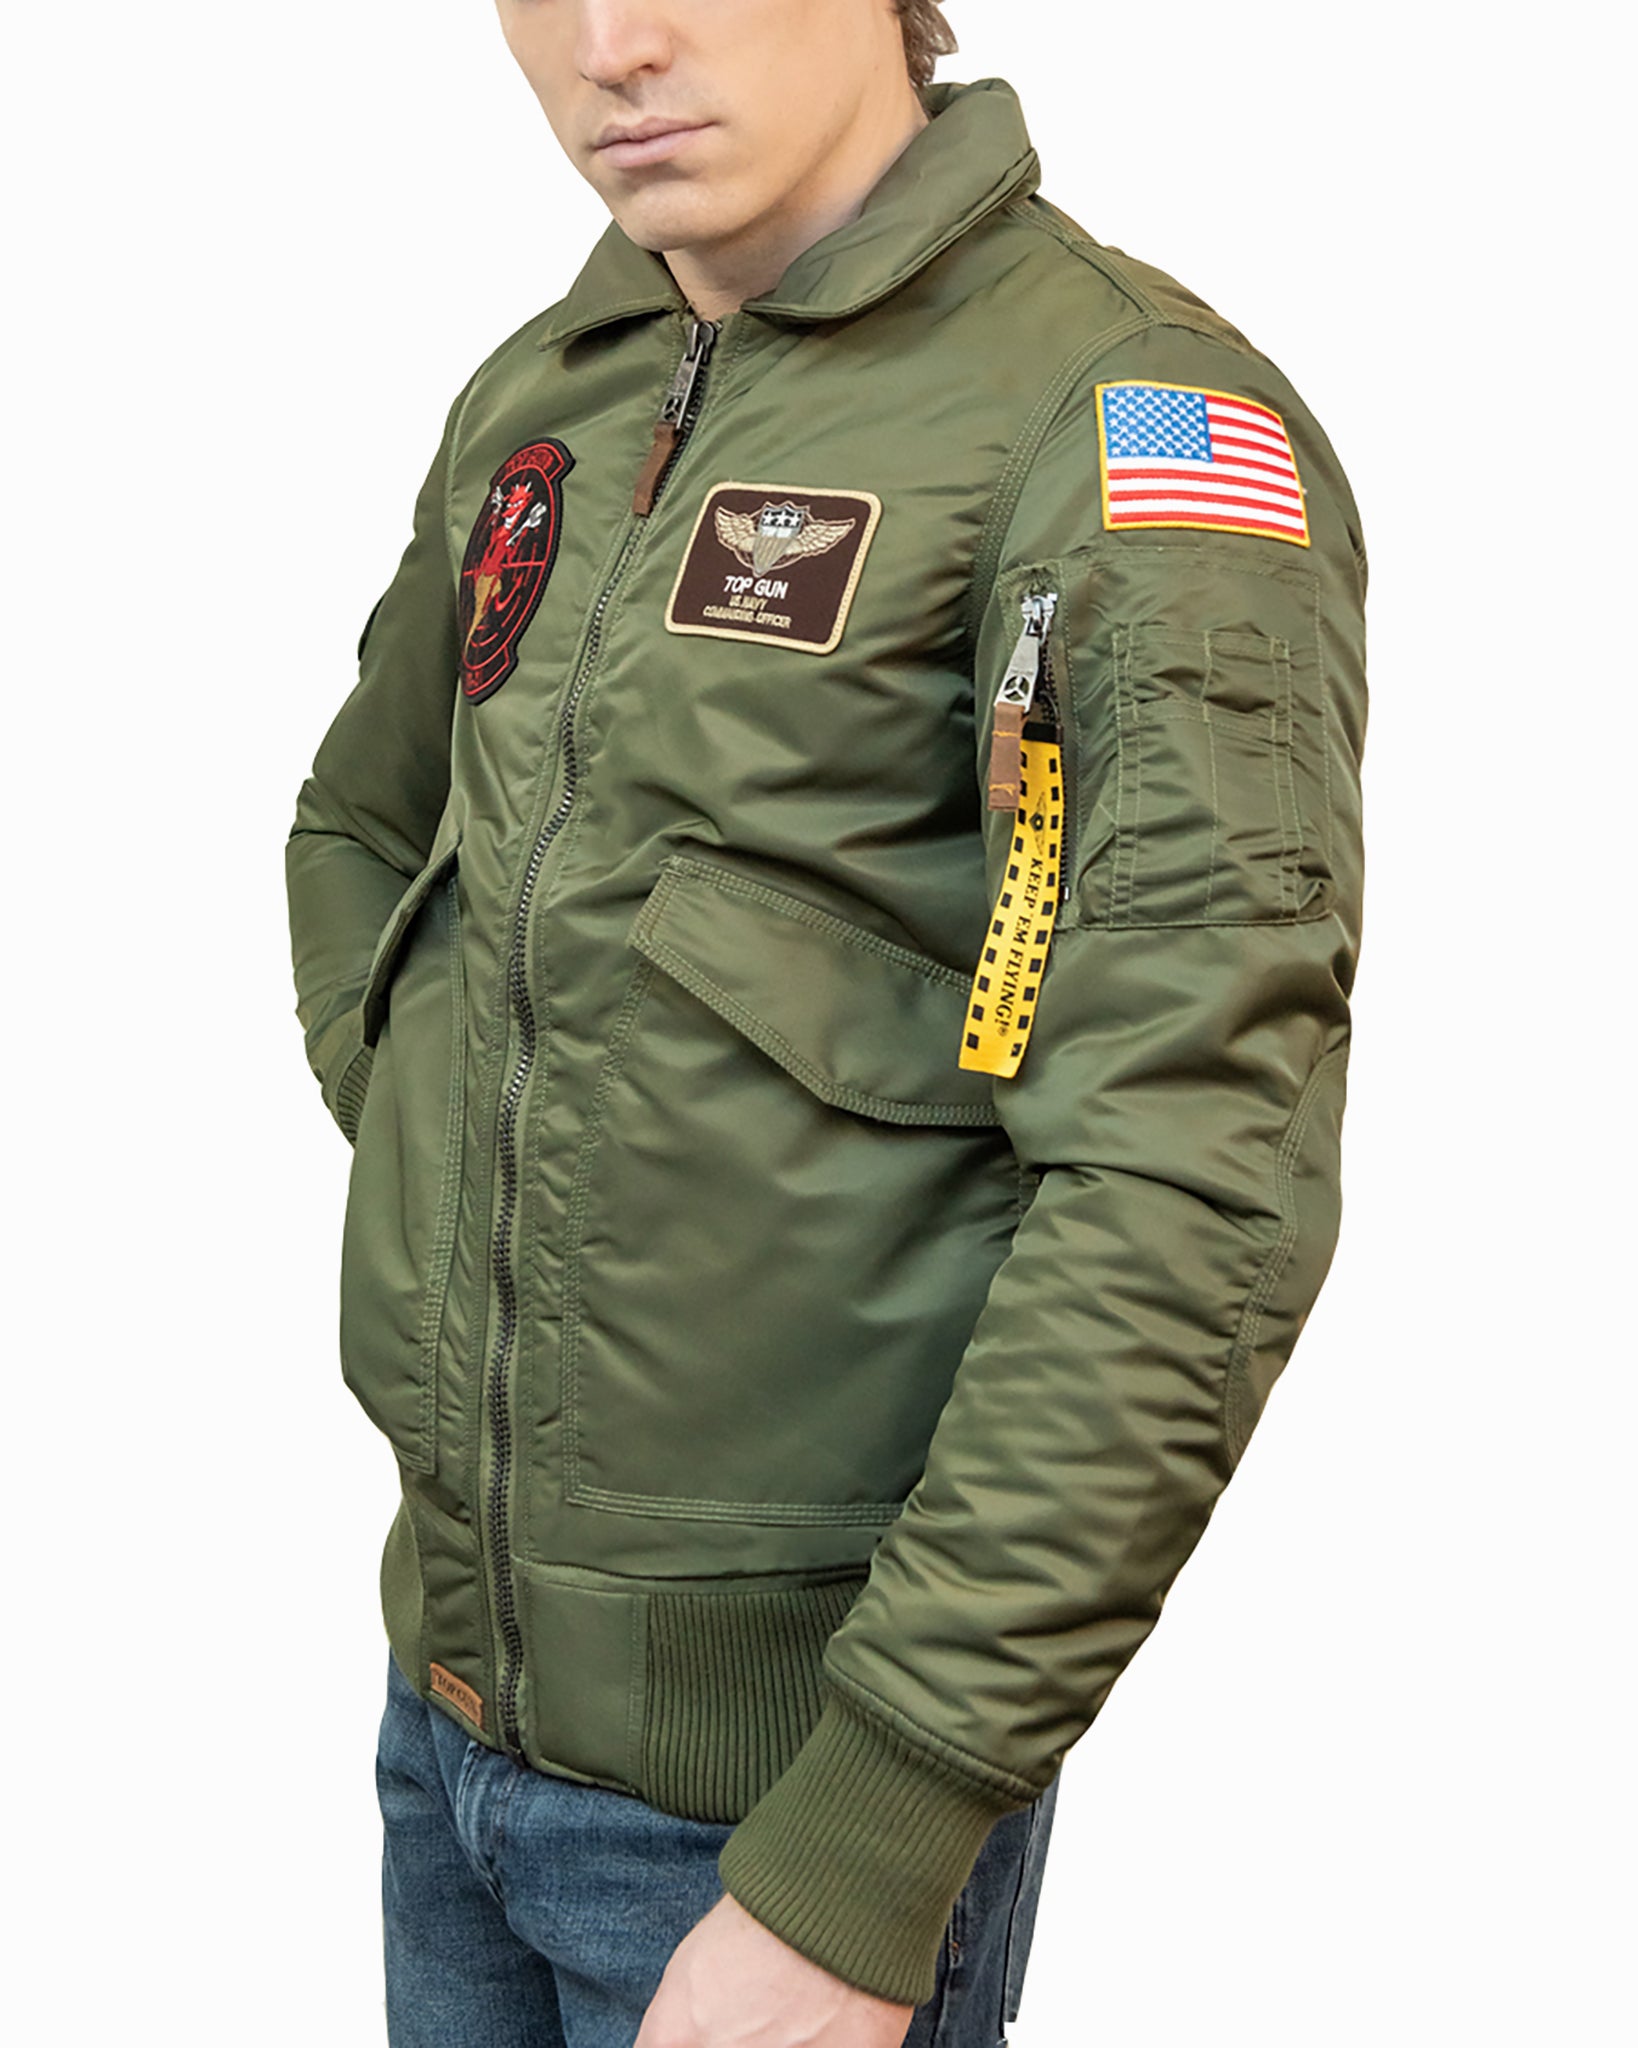 TOP GUN® CWU-45 FLIGHT JACKET WITH PATCHES - THE OFFICIAL TOP GUN 